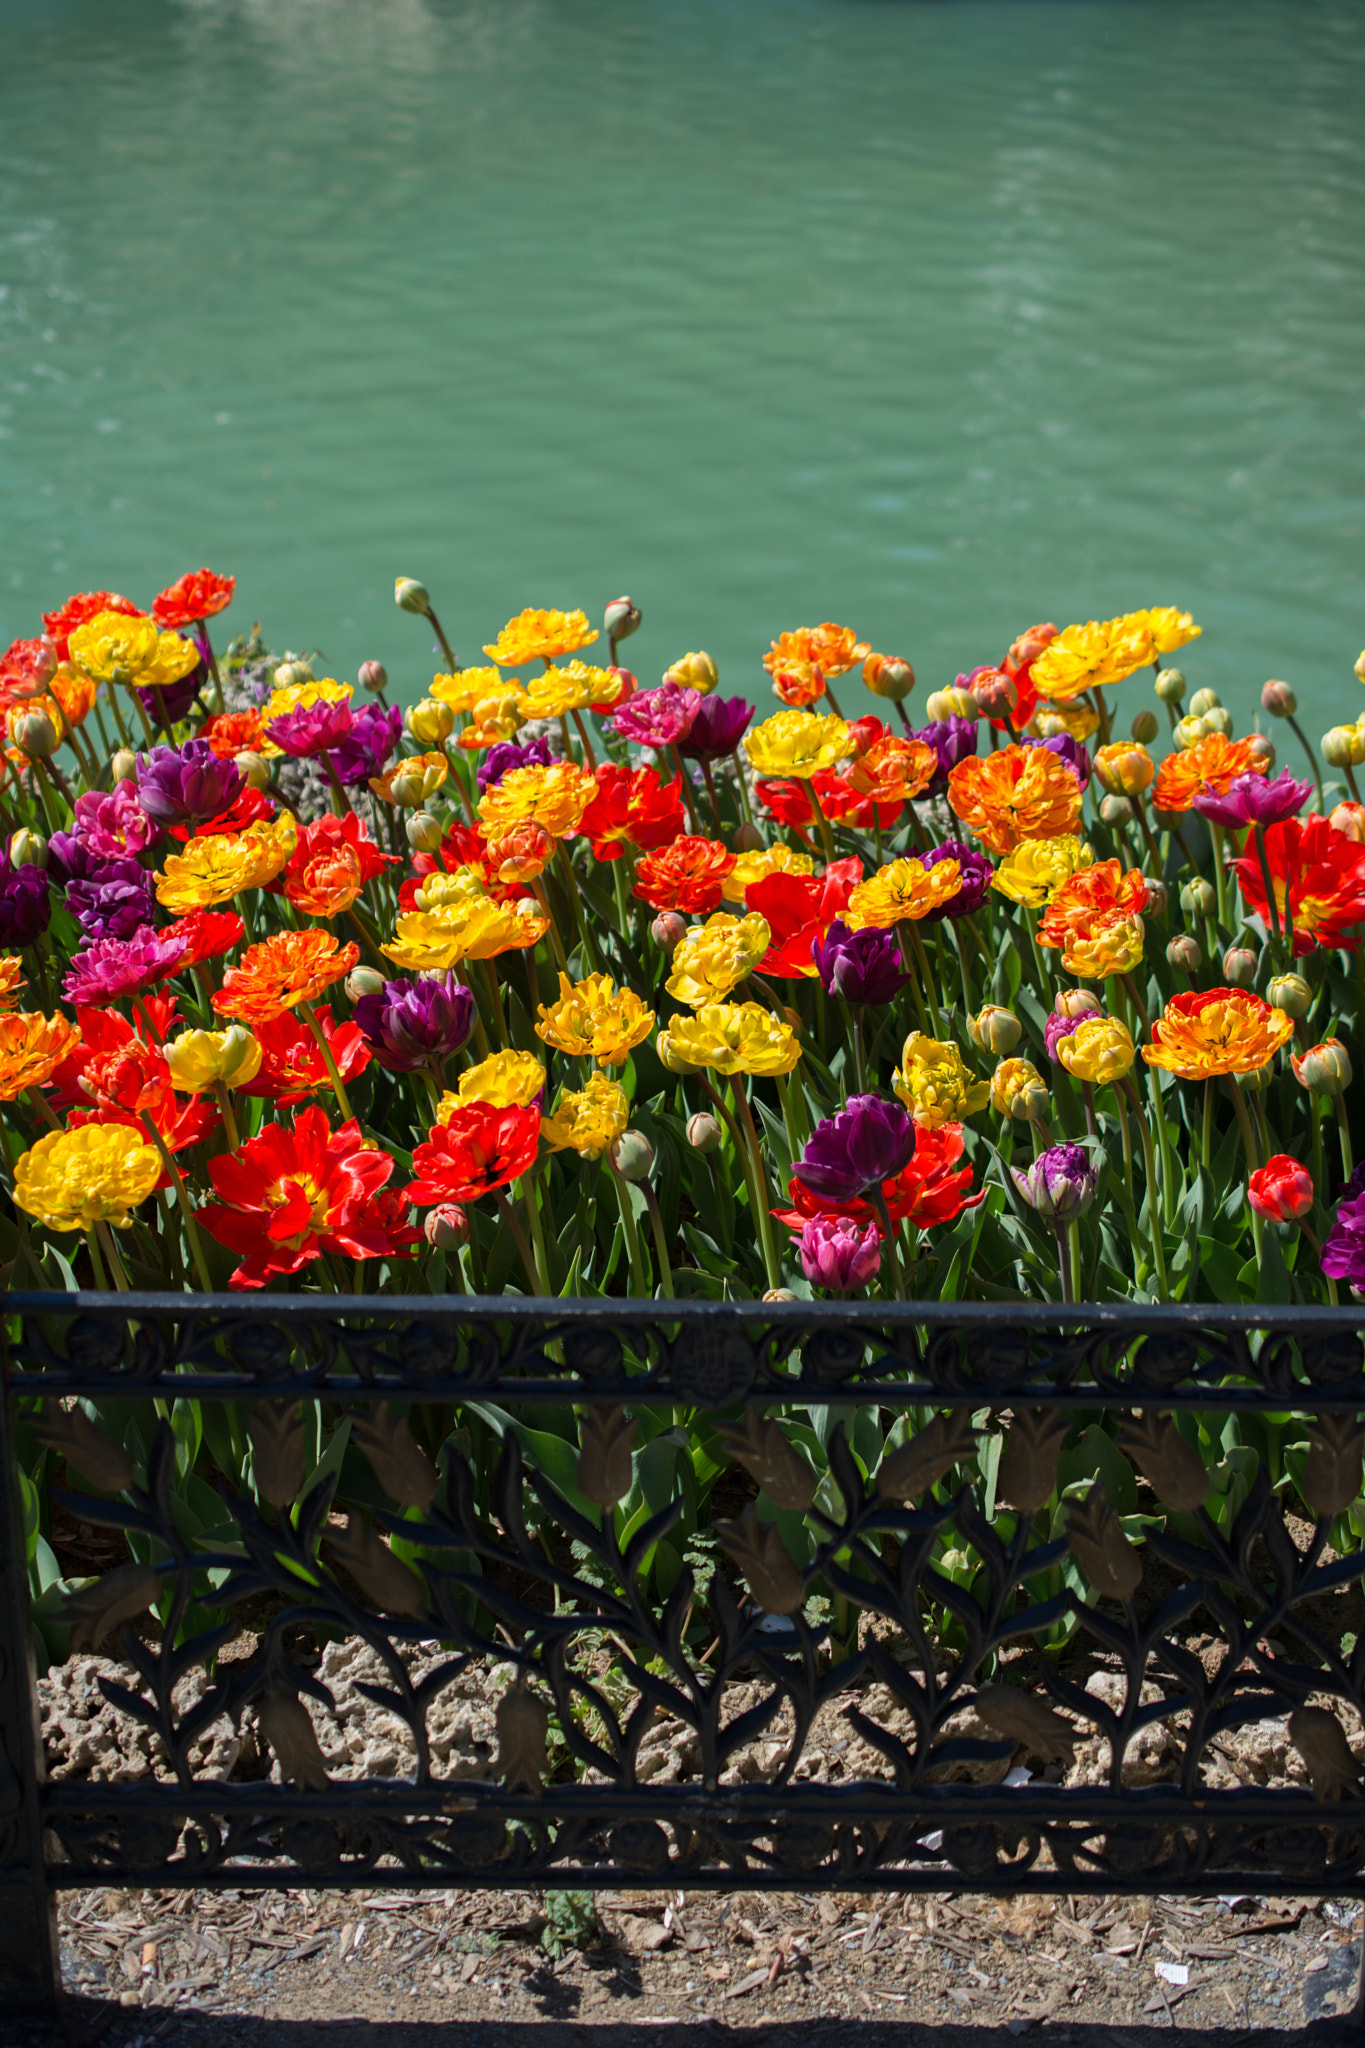 Tulip Flowers Blooming by the water